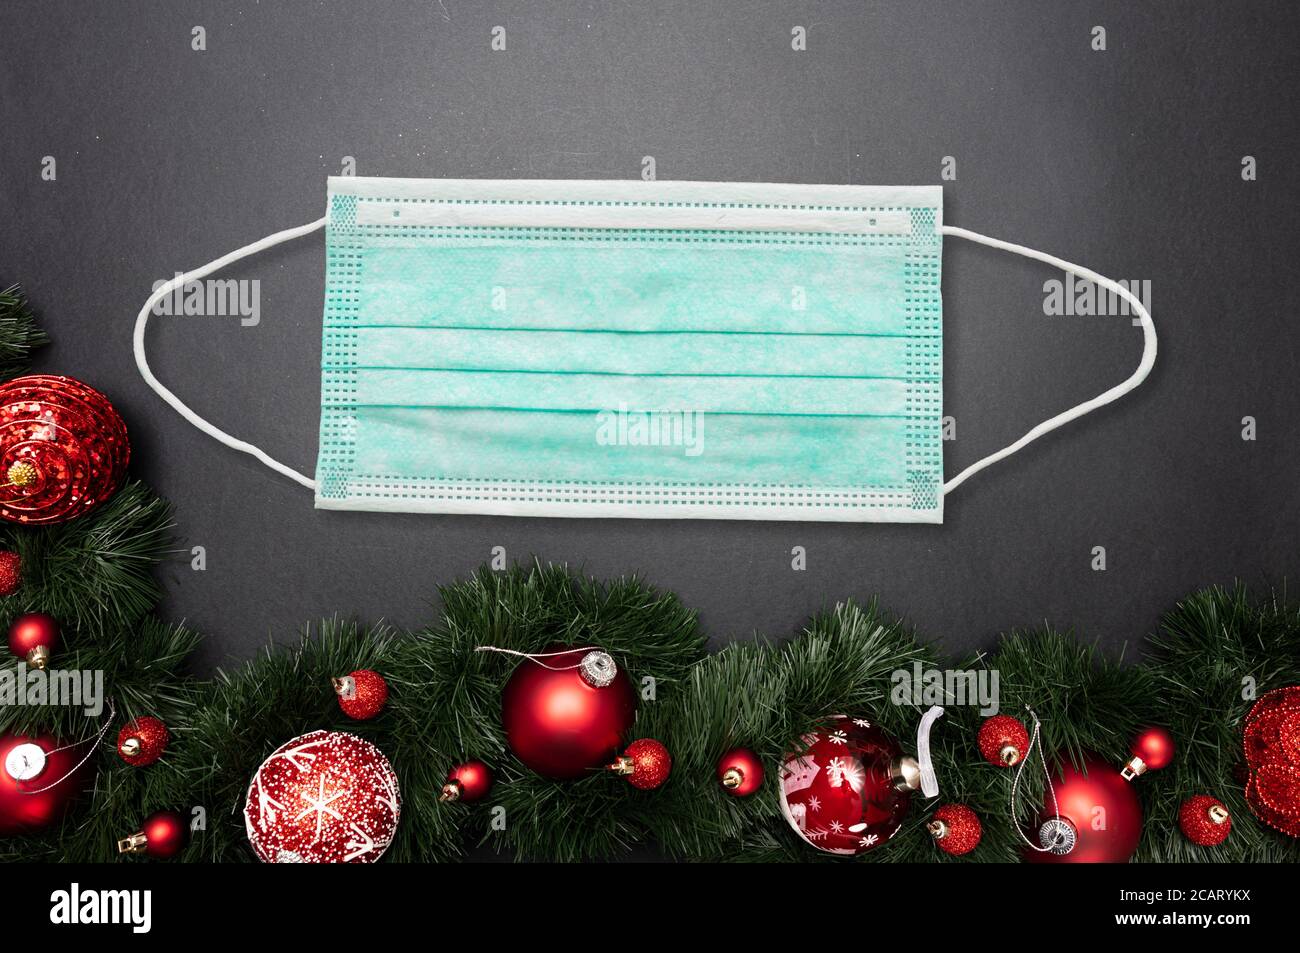 Coronavirus and Christmas 2020 concept. Face protective mask and xmas festive garland with red baubles against gray black background. COVID19 spread p Stock Photo